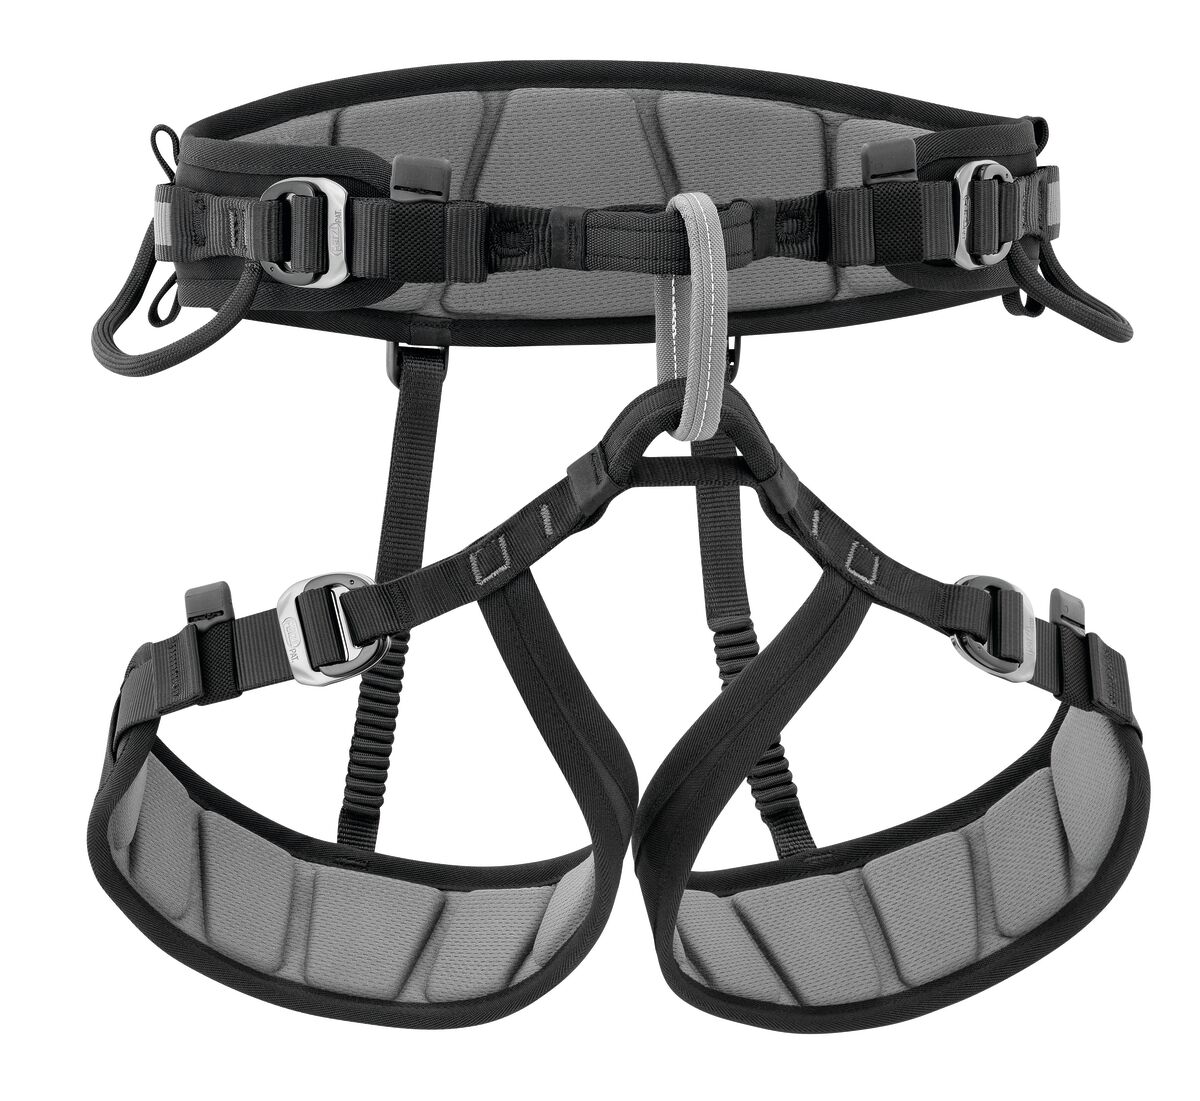 FALCON MOUNTAIN, Ultra-lightweight and comfortable sit harness for